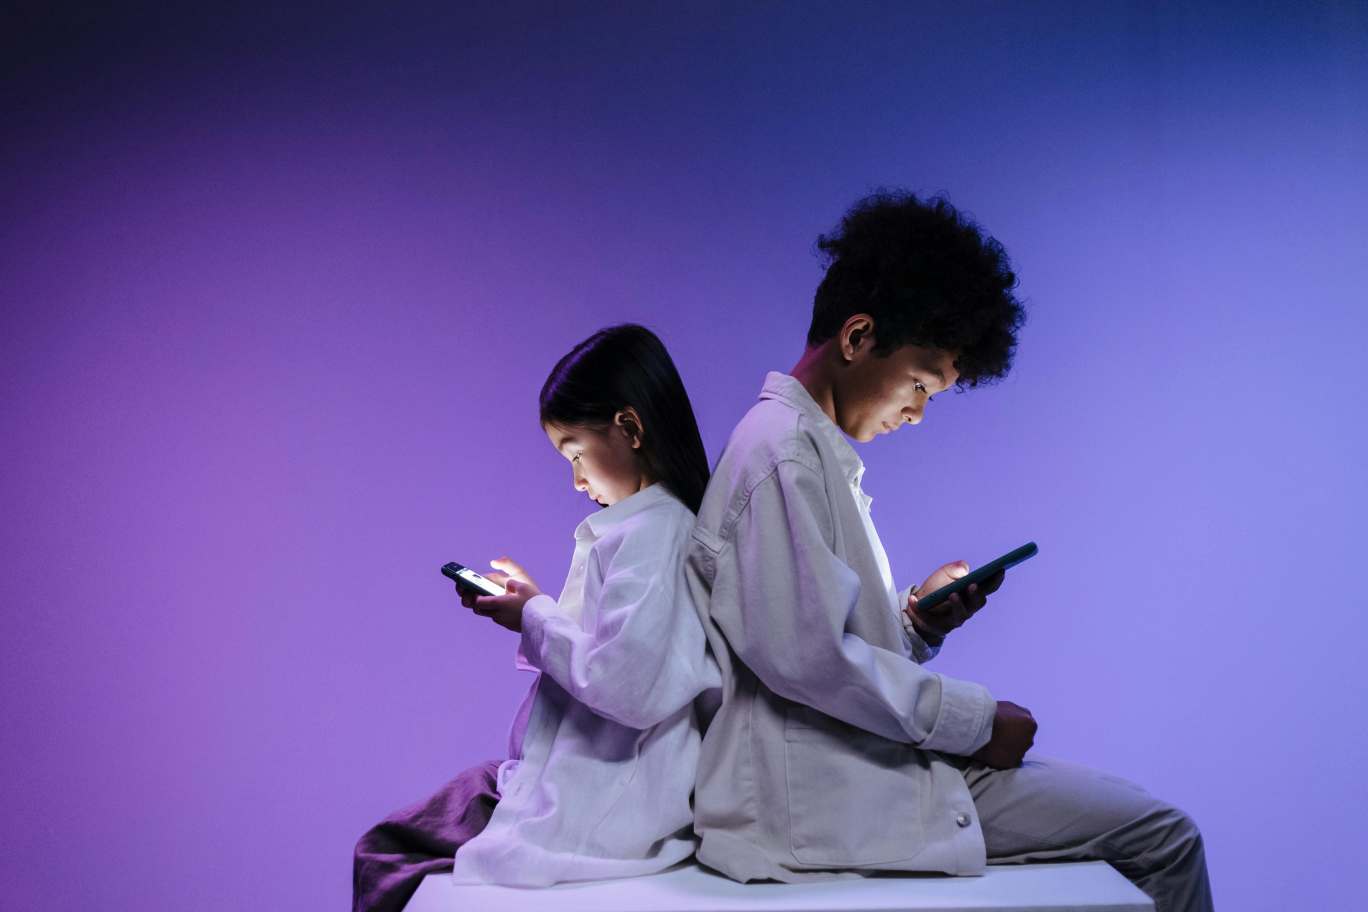 A photo of two kids using smartphones